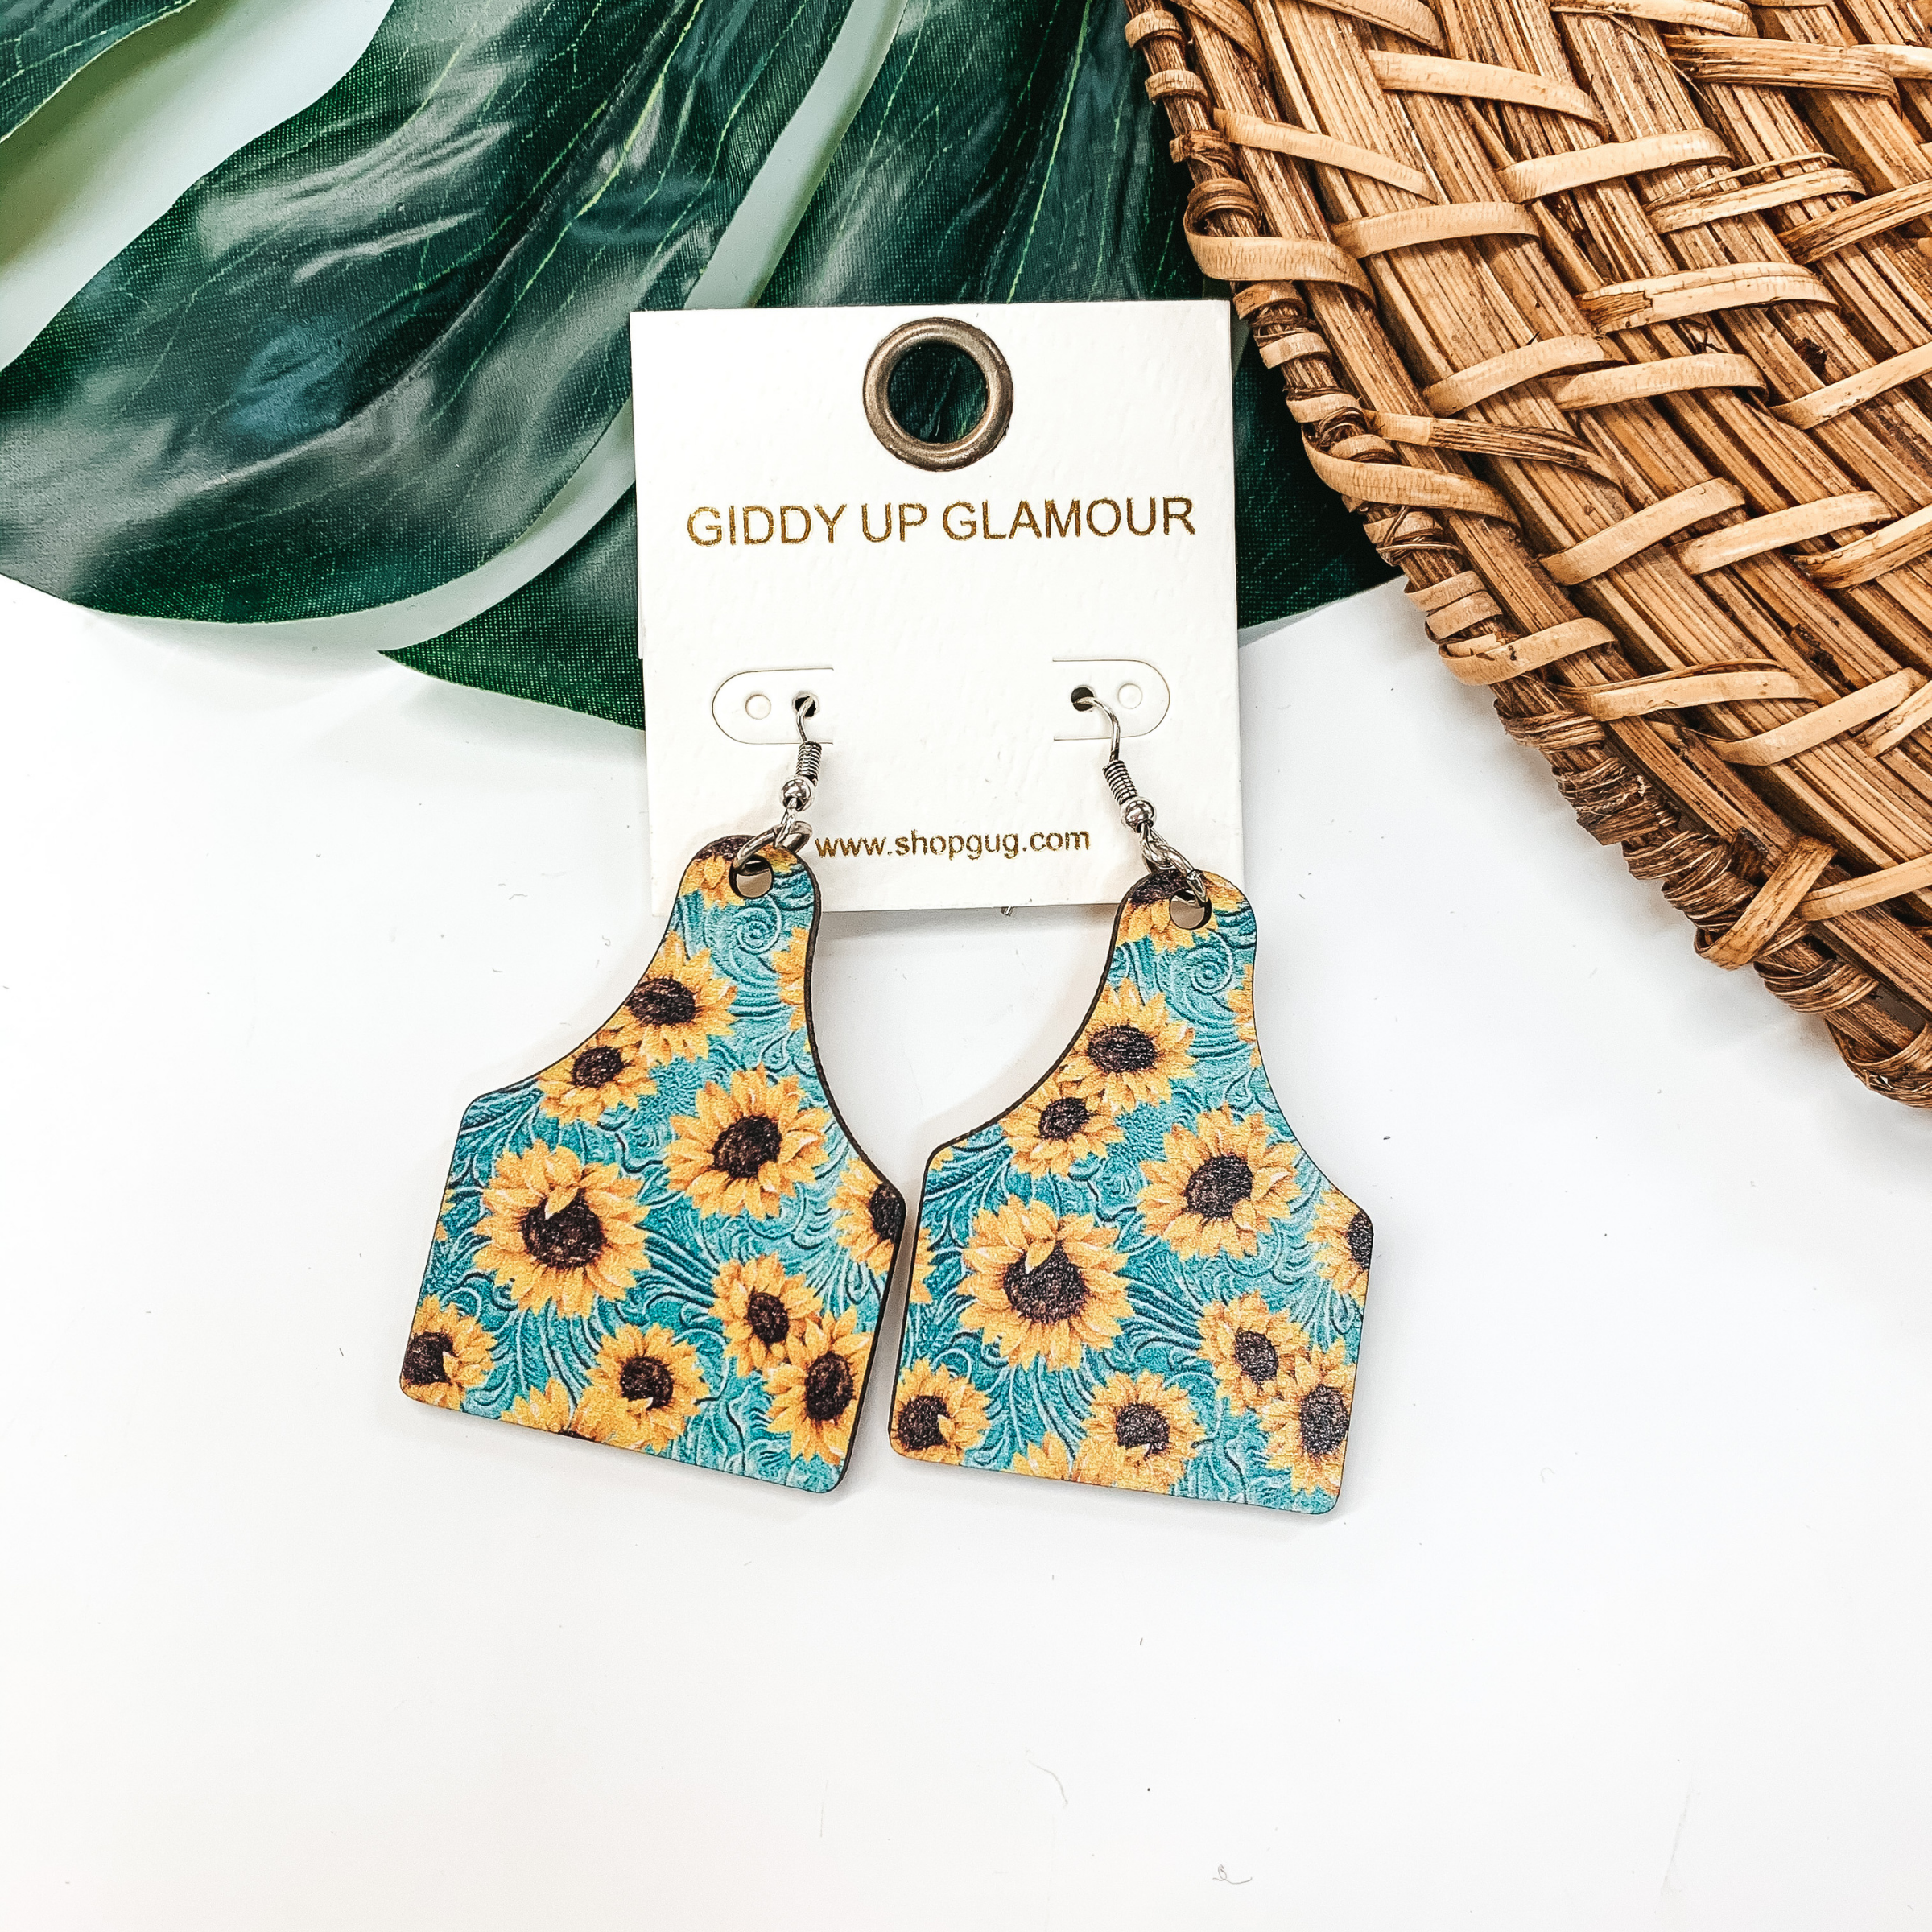 Sunflower Wood Ear Tag Earrings in Turquoise - Giddy Up Glamour Boutique